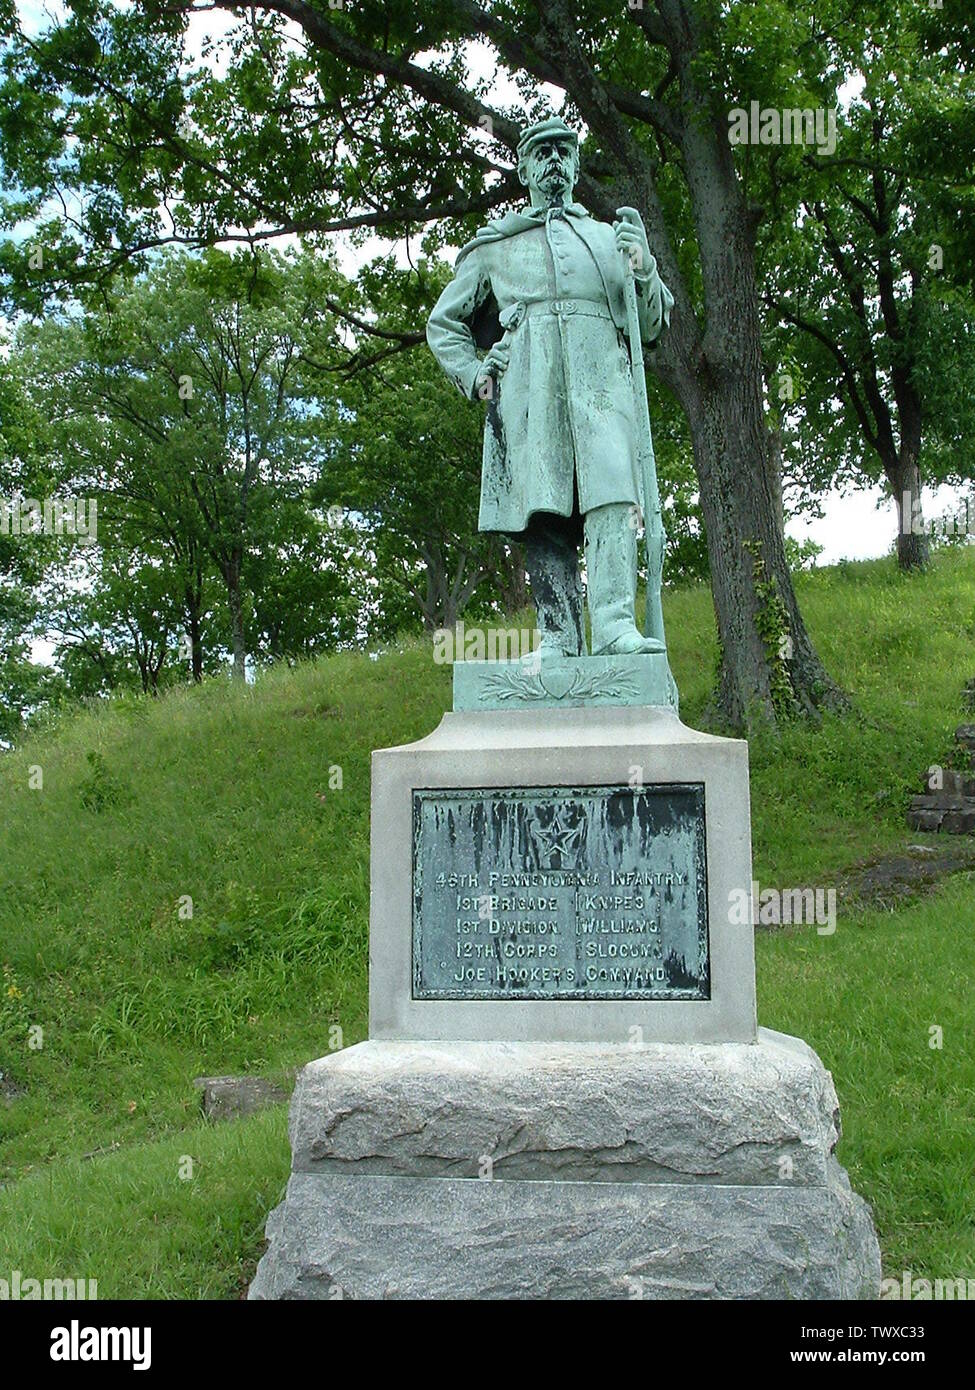 46th Pennsylvania monument (dedicated 1897) on Orchard Knob, Chattanooga, TN. Photo by M. Stewart.; 15 May 2006; Own work; Mws77 (talk) (Uploads); Stock Photo